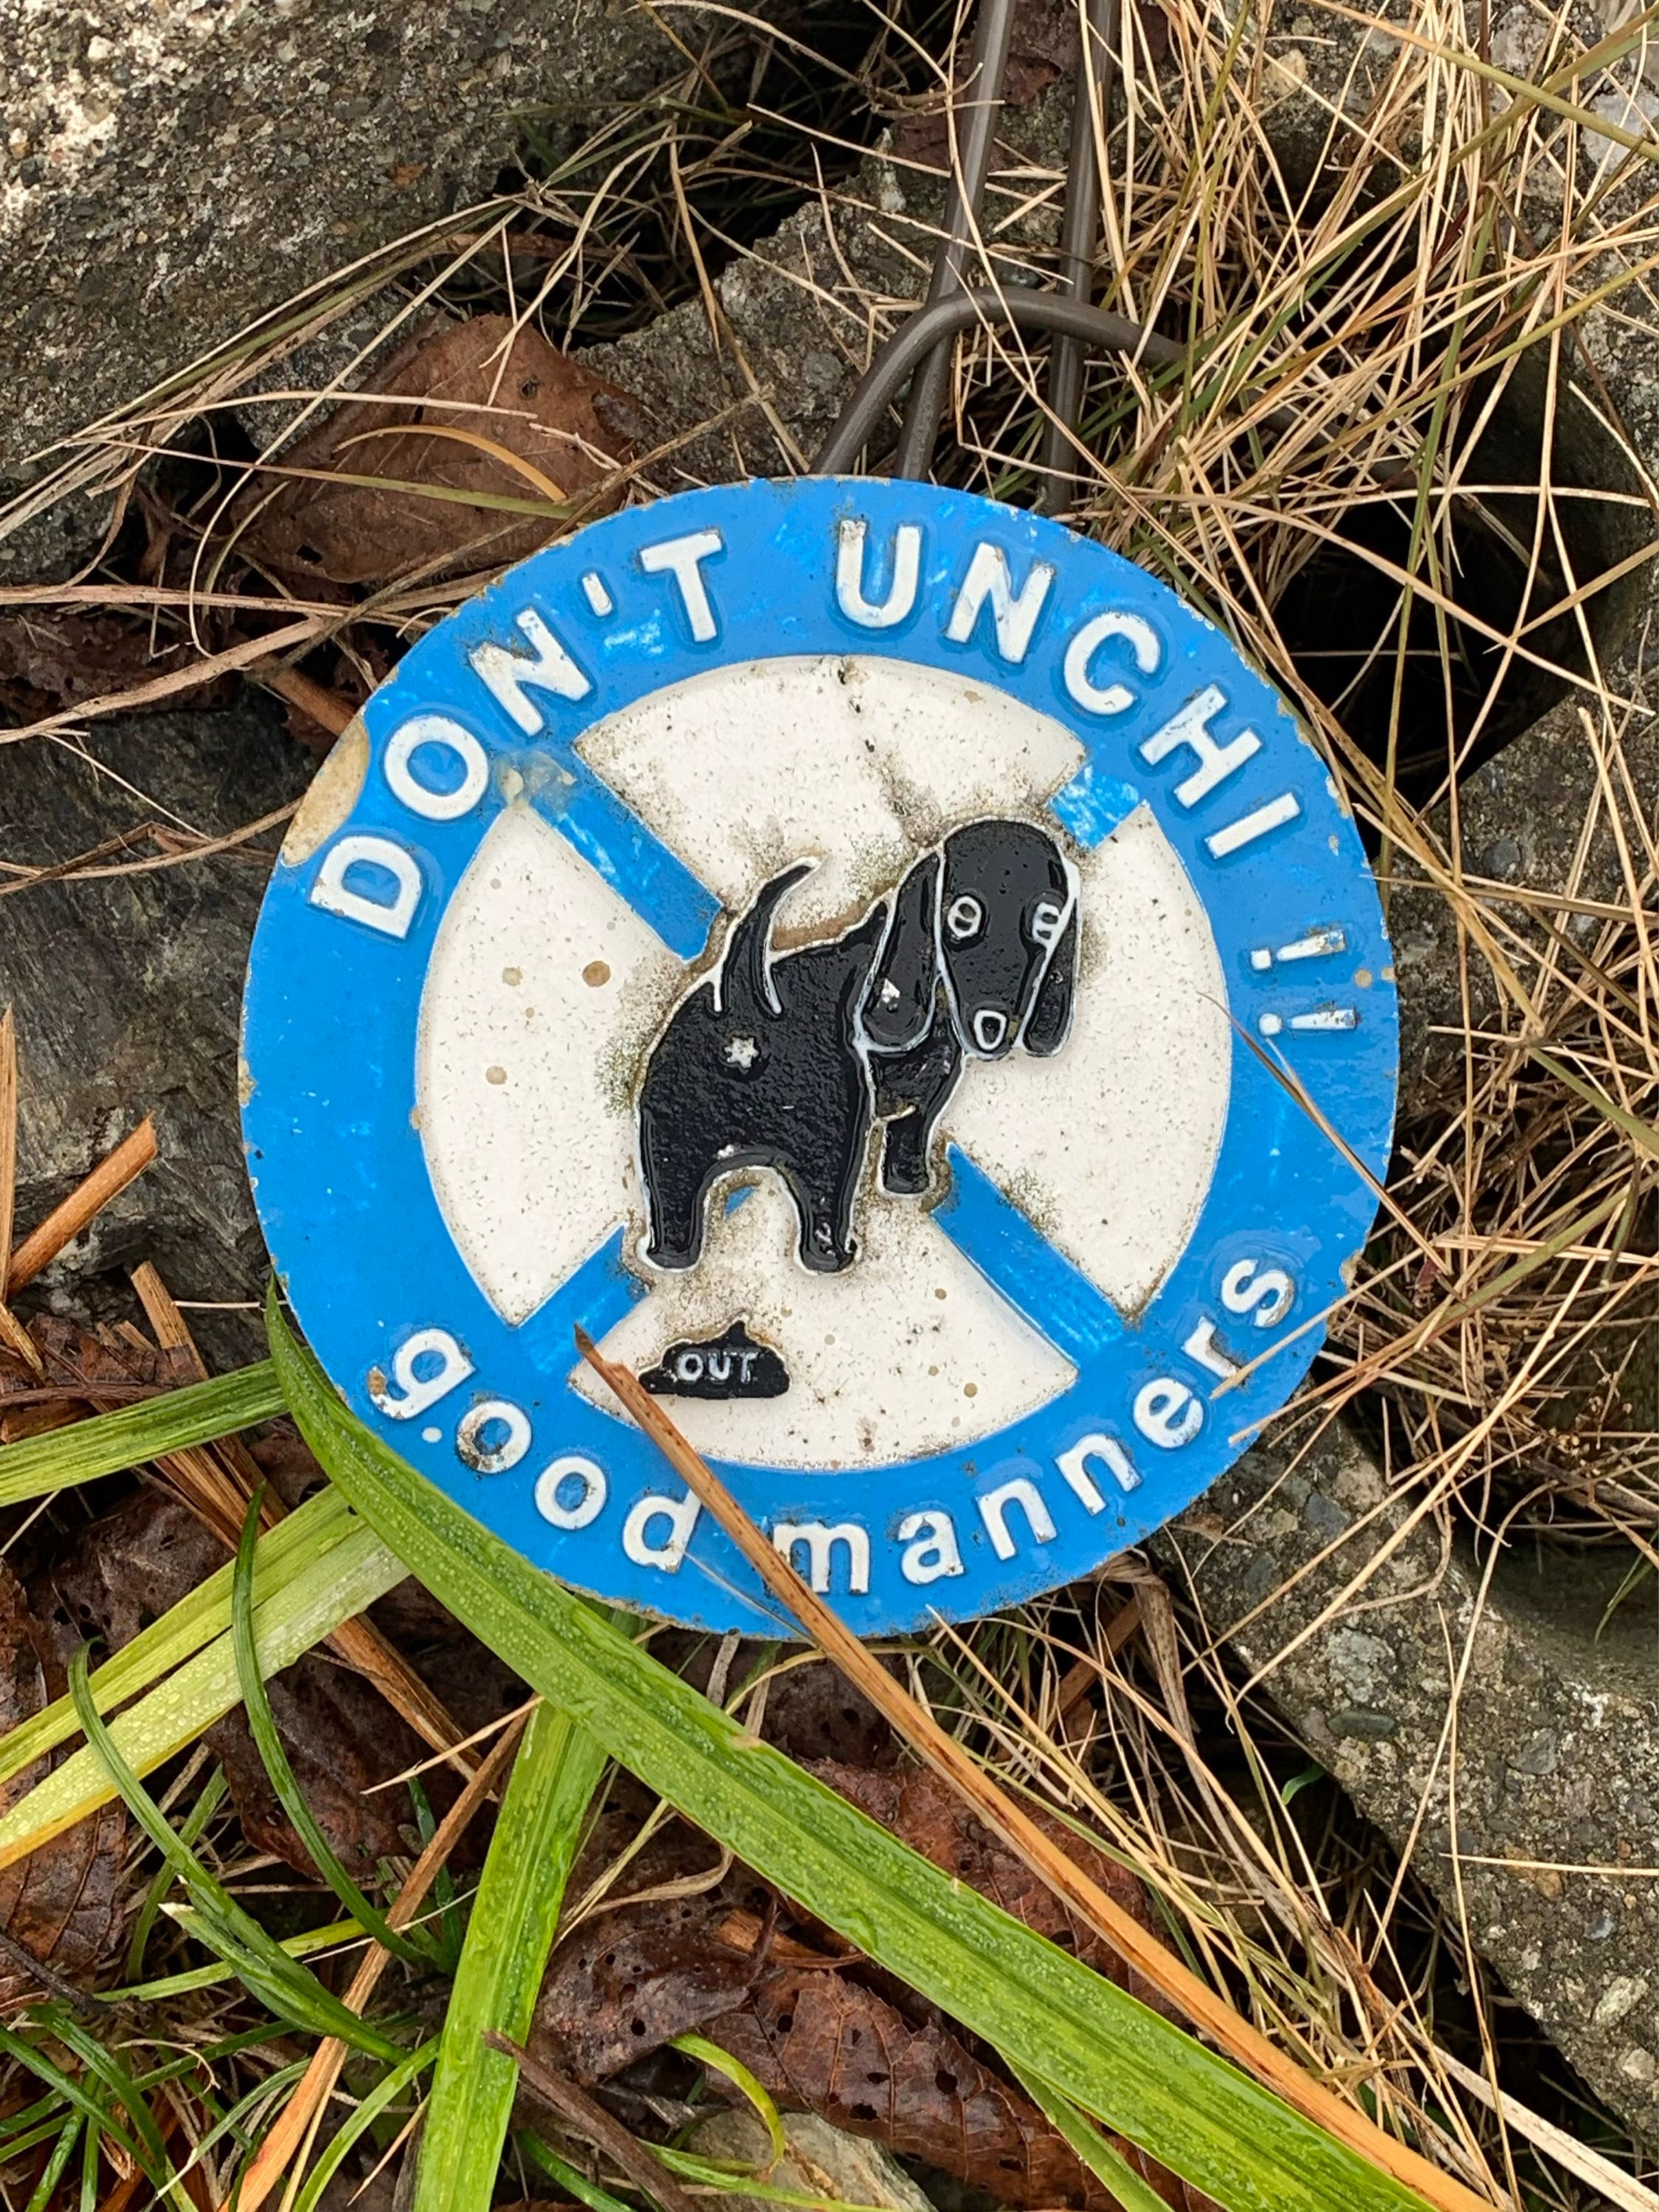 A sign in the grass says: Don’t unchi!! good manners.